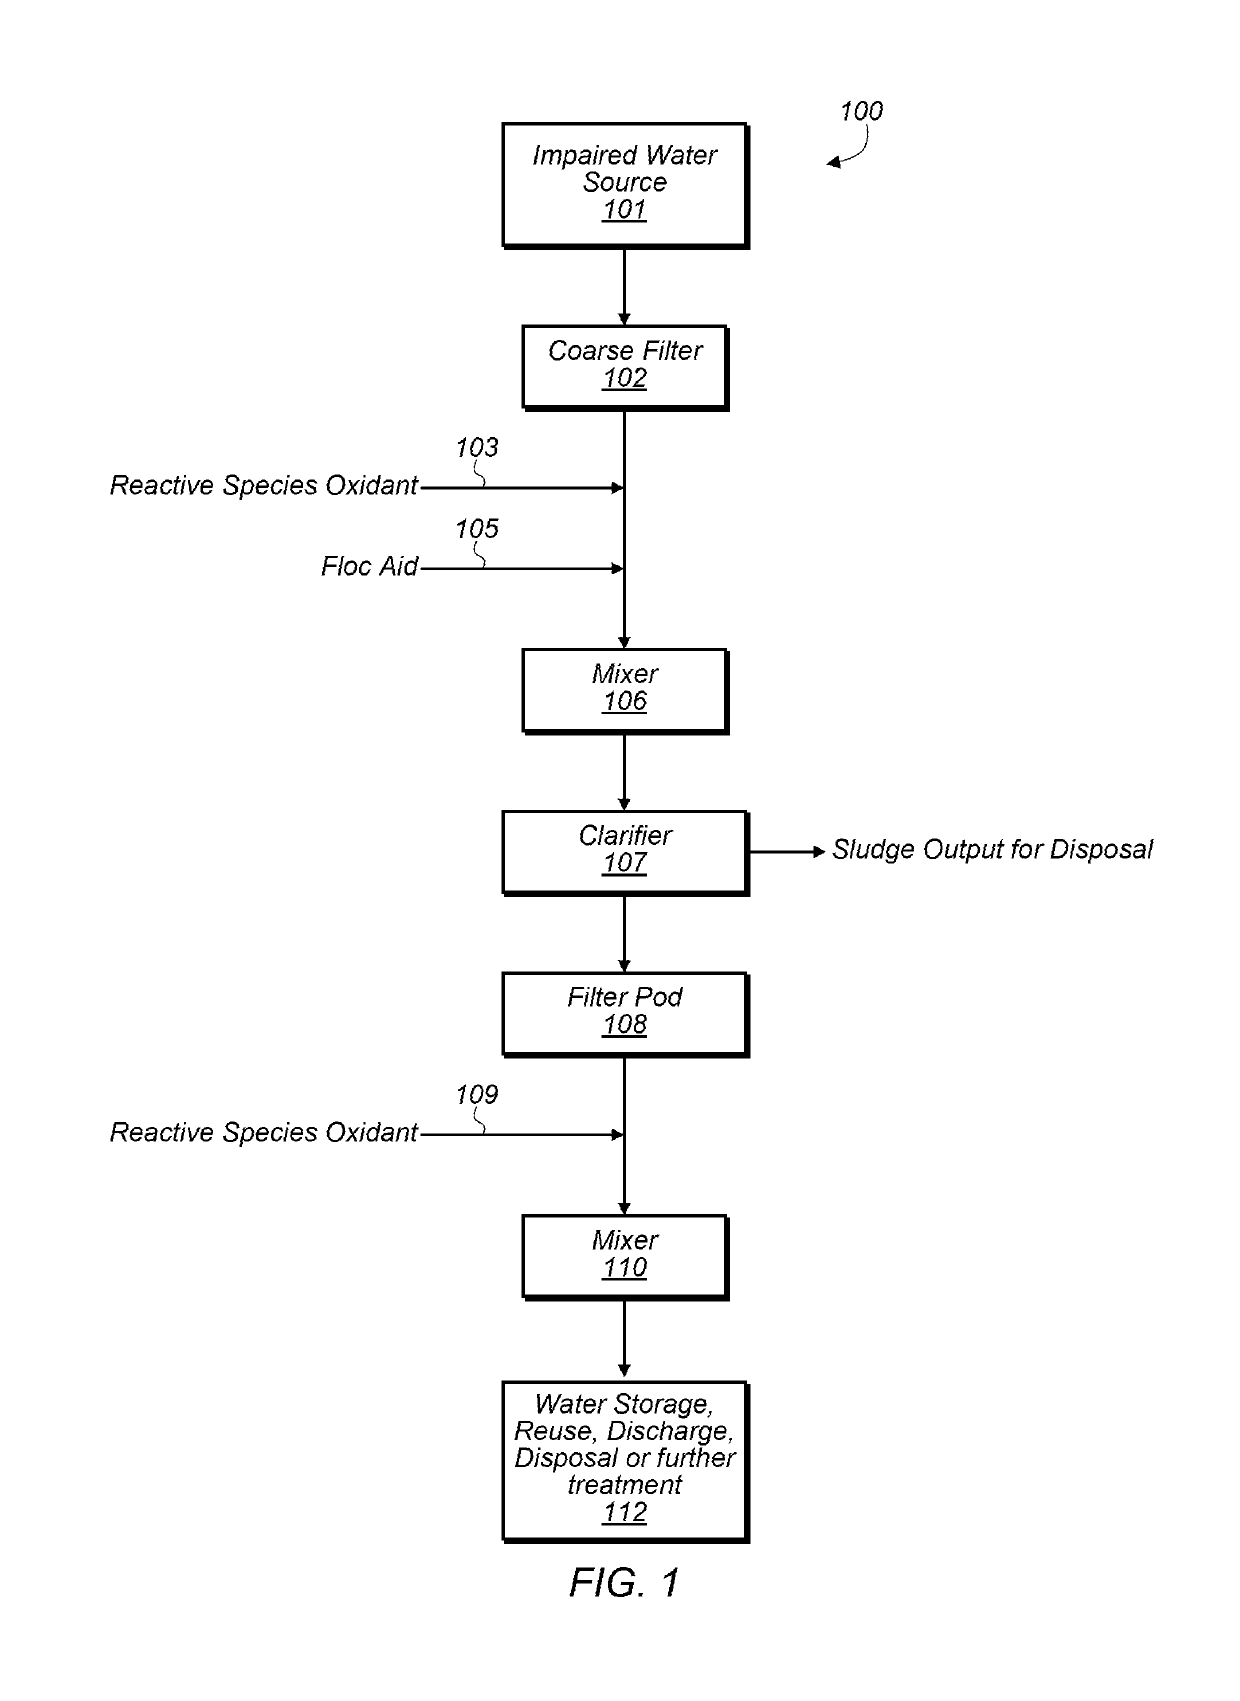 Systems and method of water treatment utilizing reactive oxygen species and applications thereof